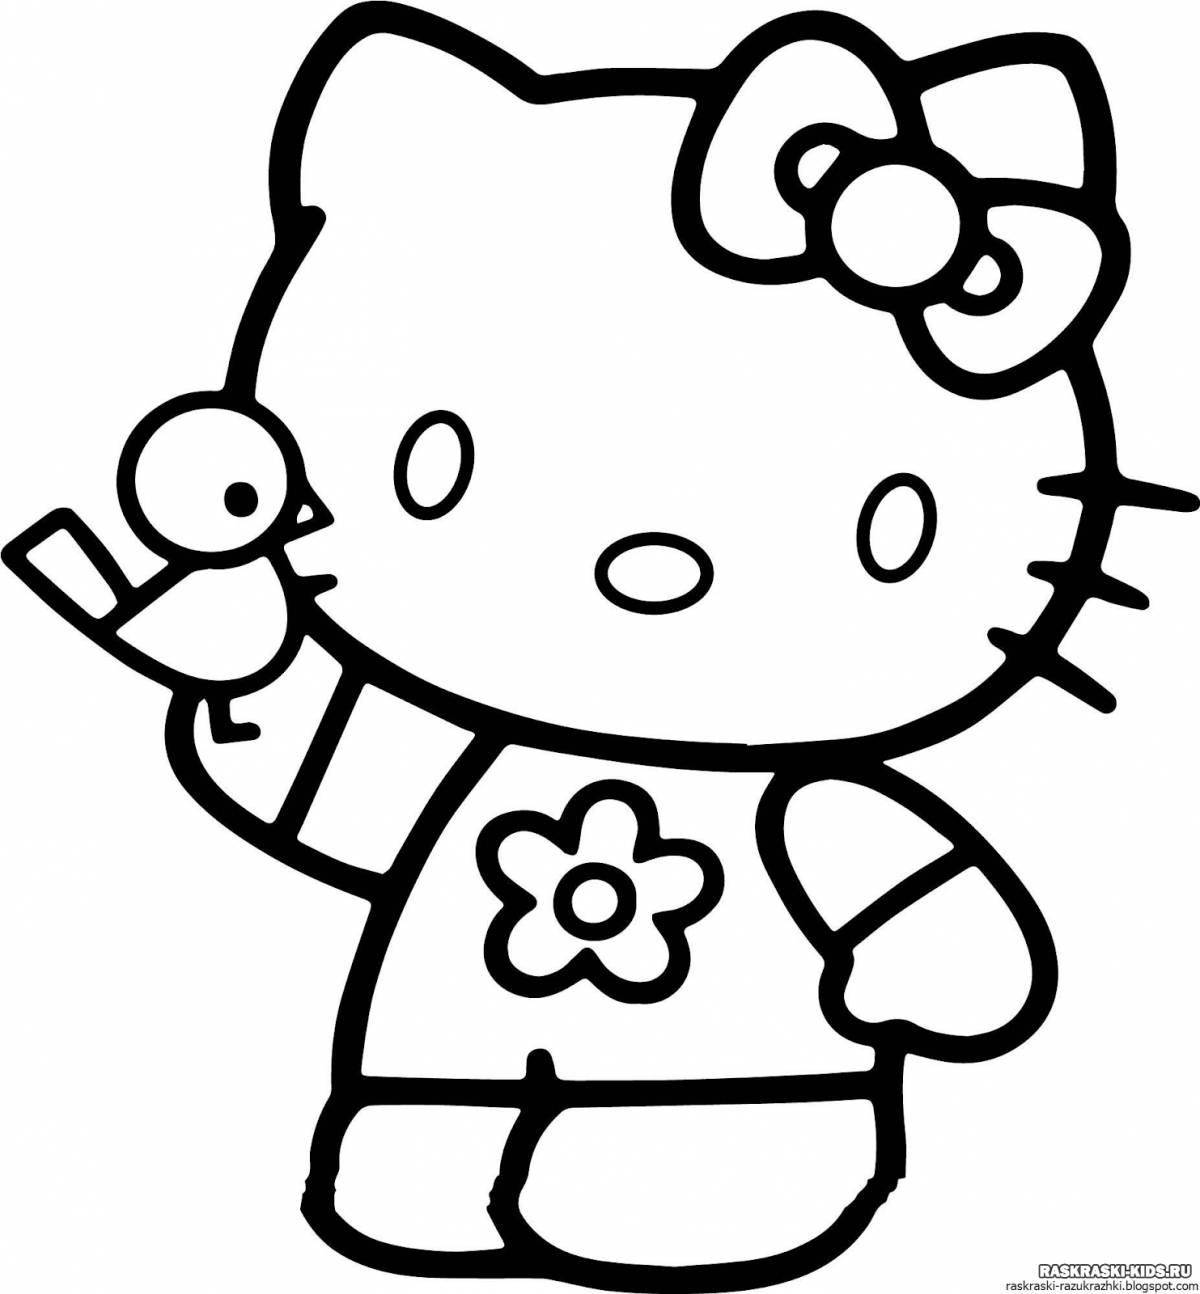 Great coloring hello kitty with heart